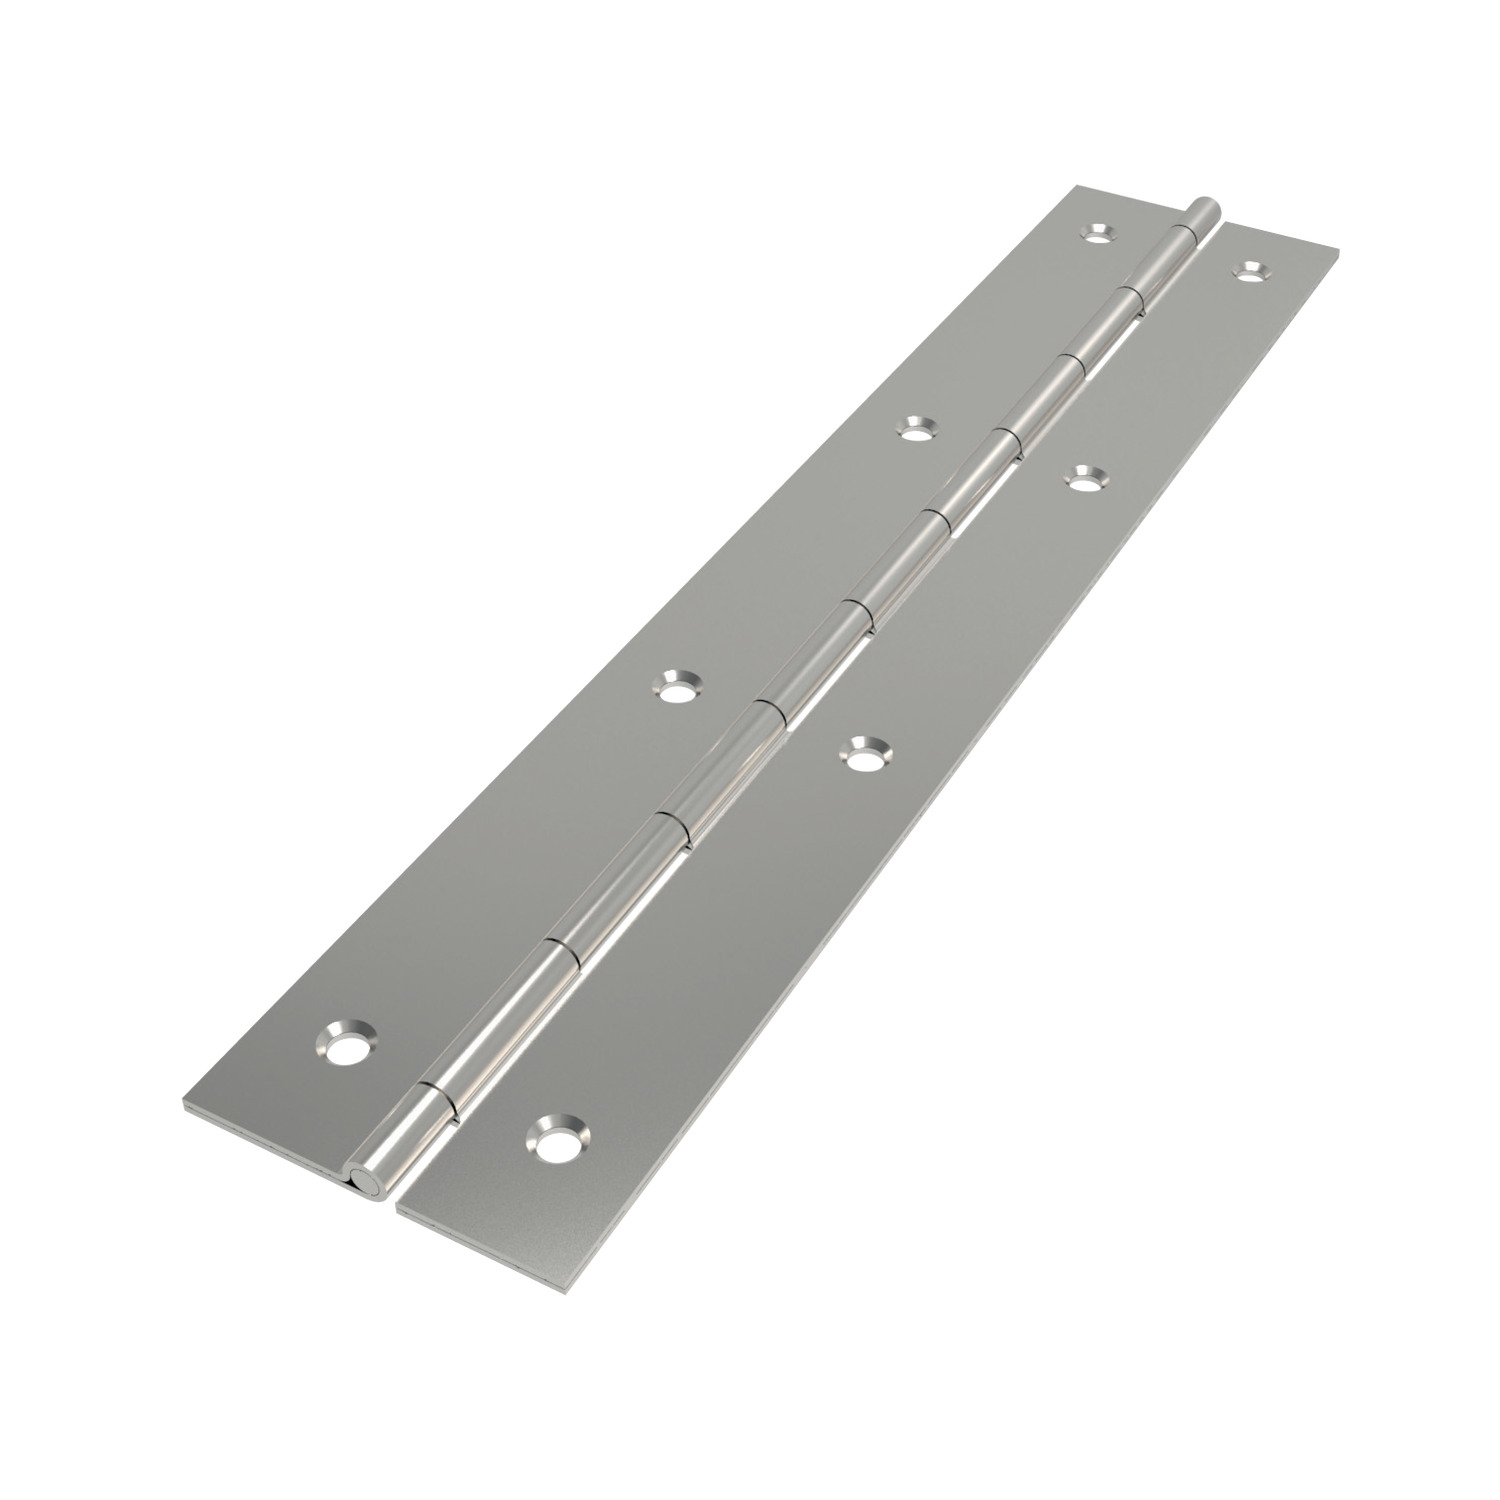 S0100.AC0336 Surface Mount - Piano Hinges Screw mount - Stainless steel. 360 x 30